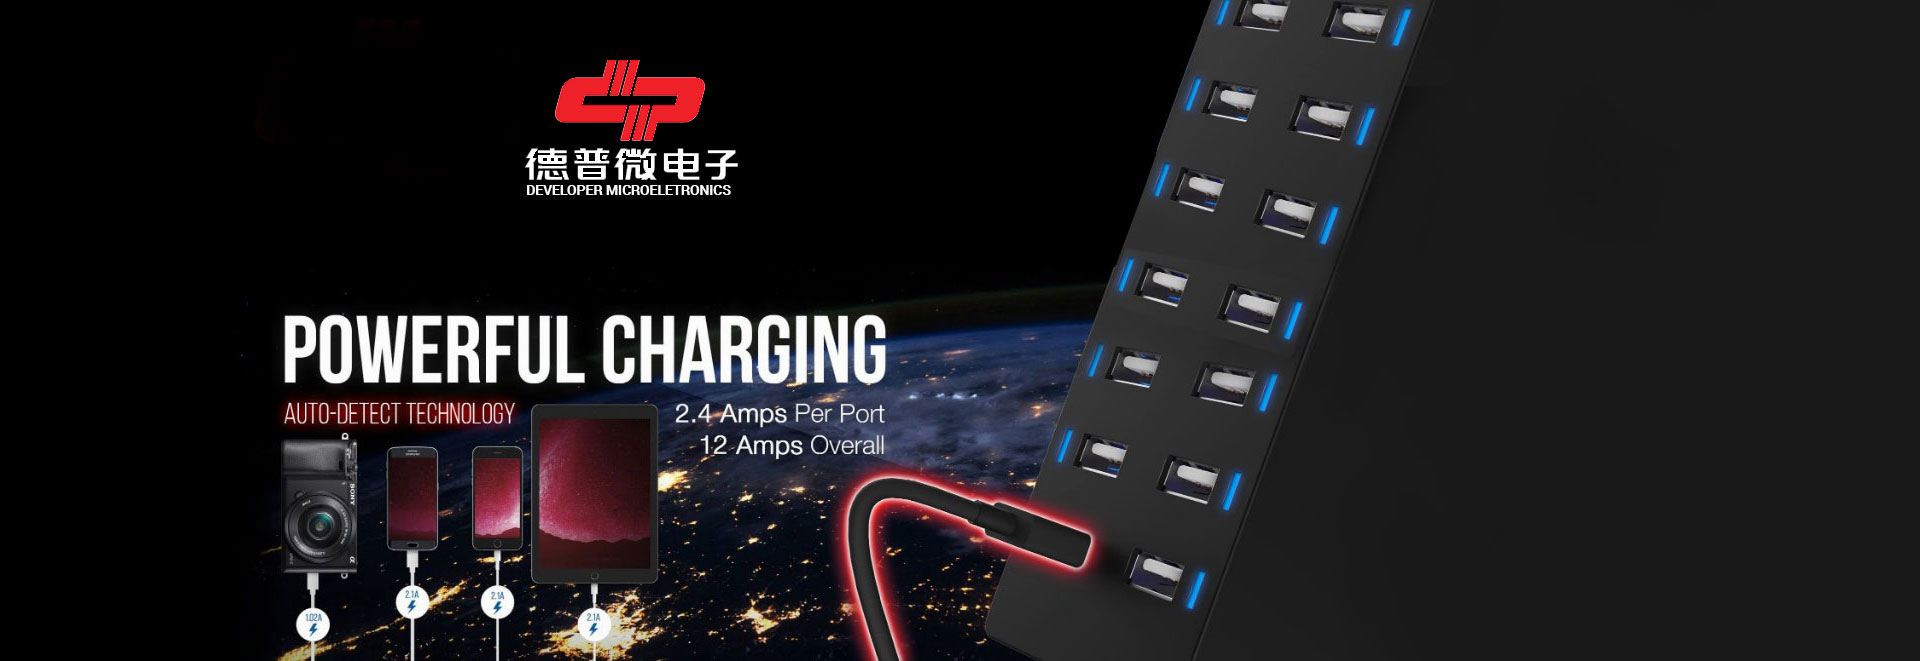 Powerful Charging, Auto Detect Technology